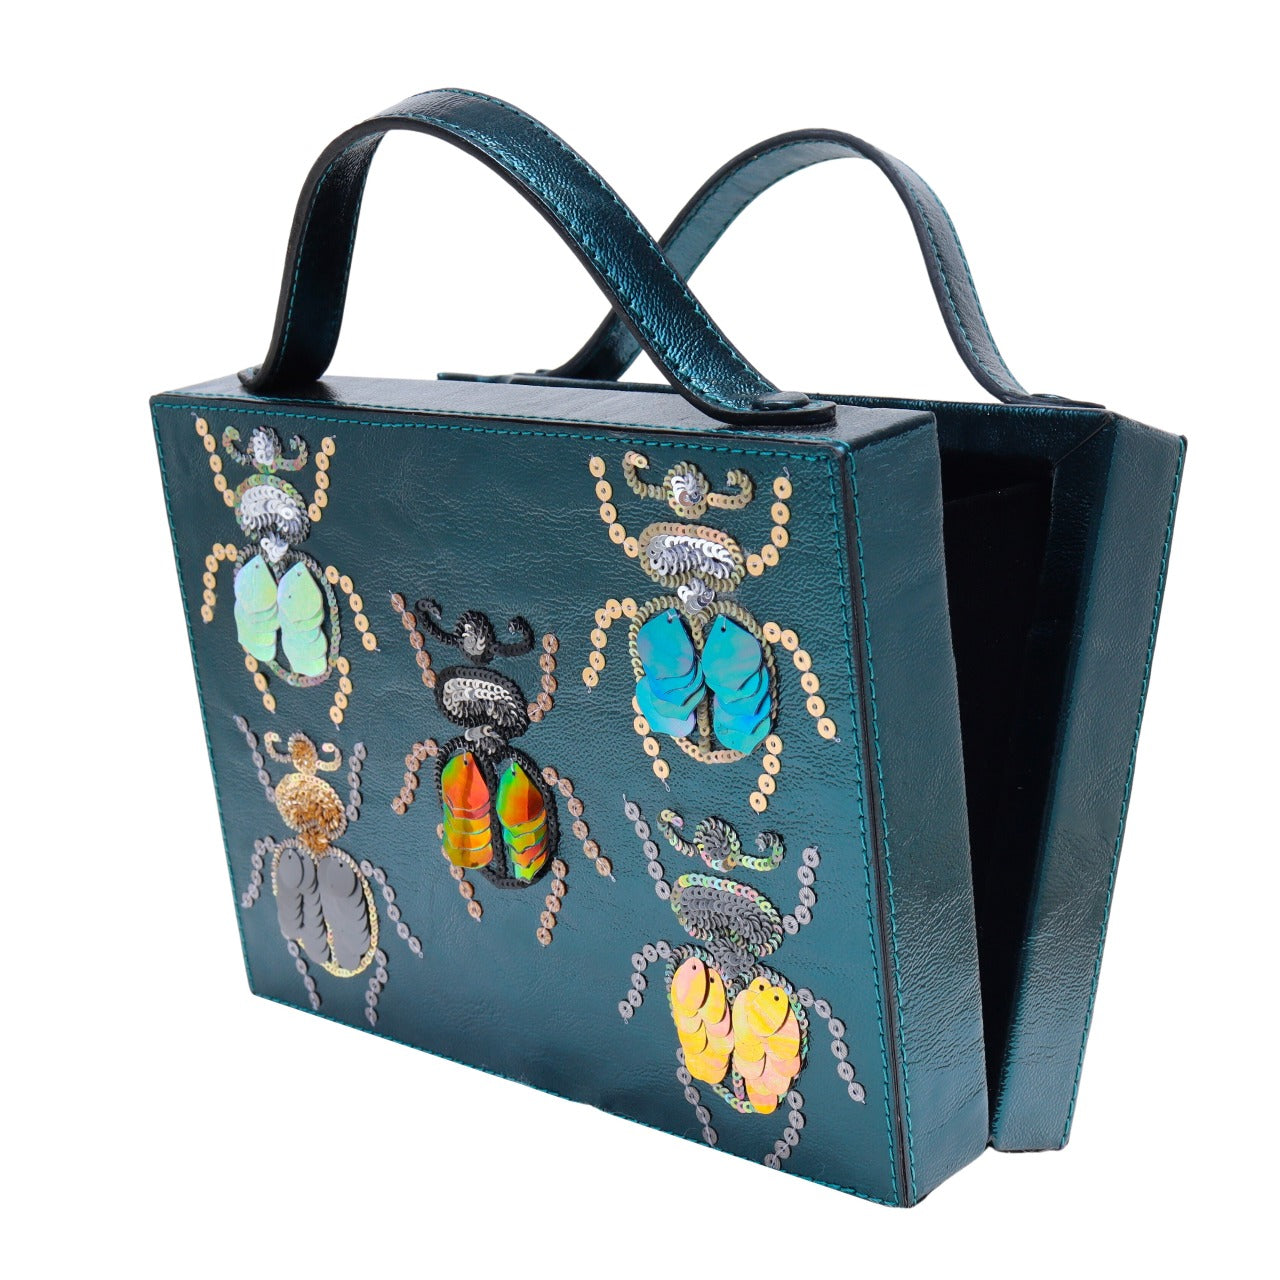 Bedazzled Beetle Briefcase Bag by Simitri